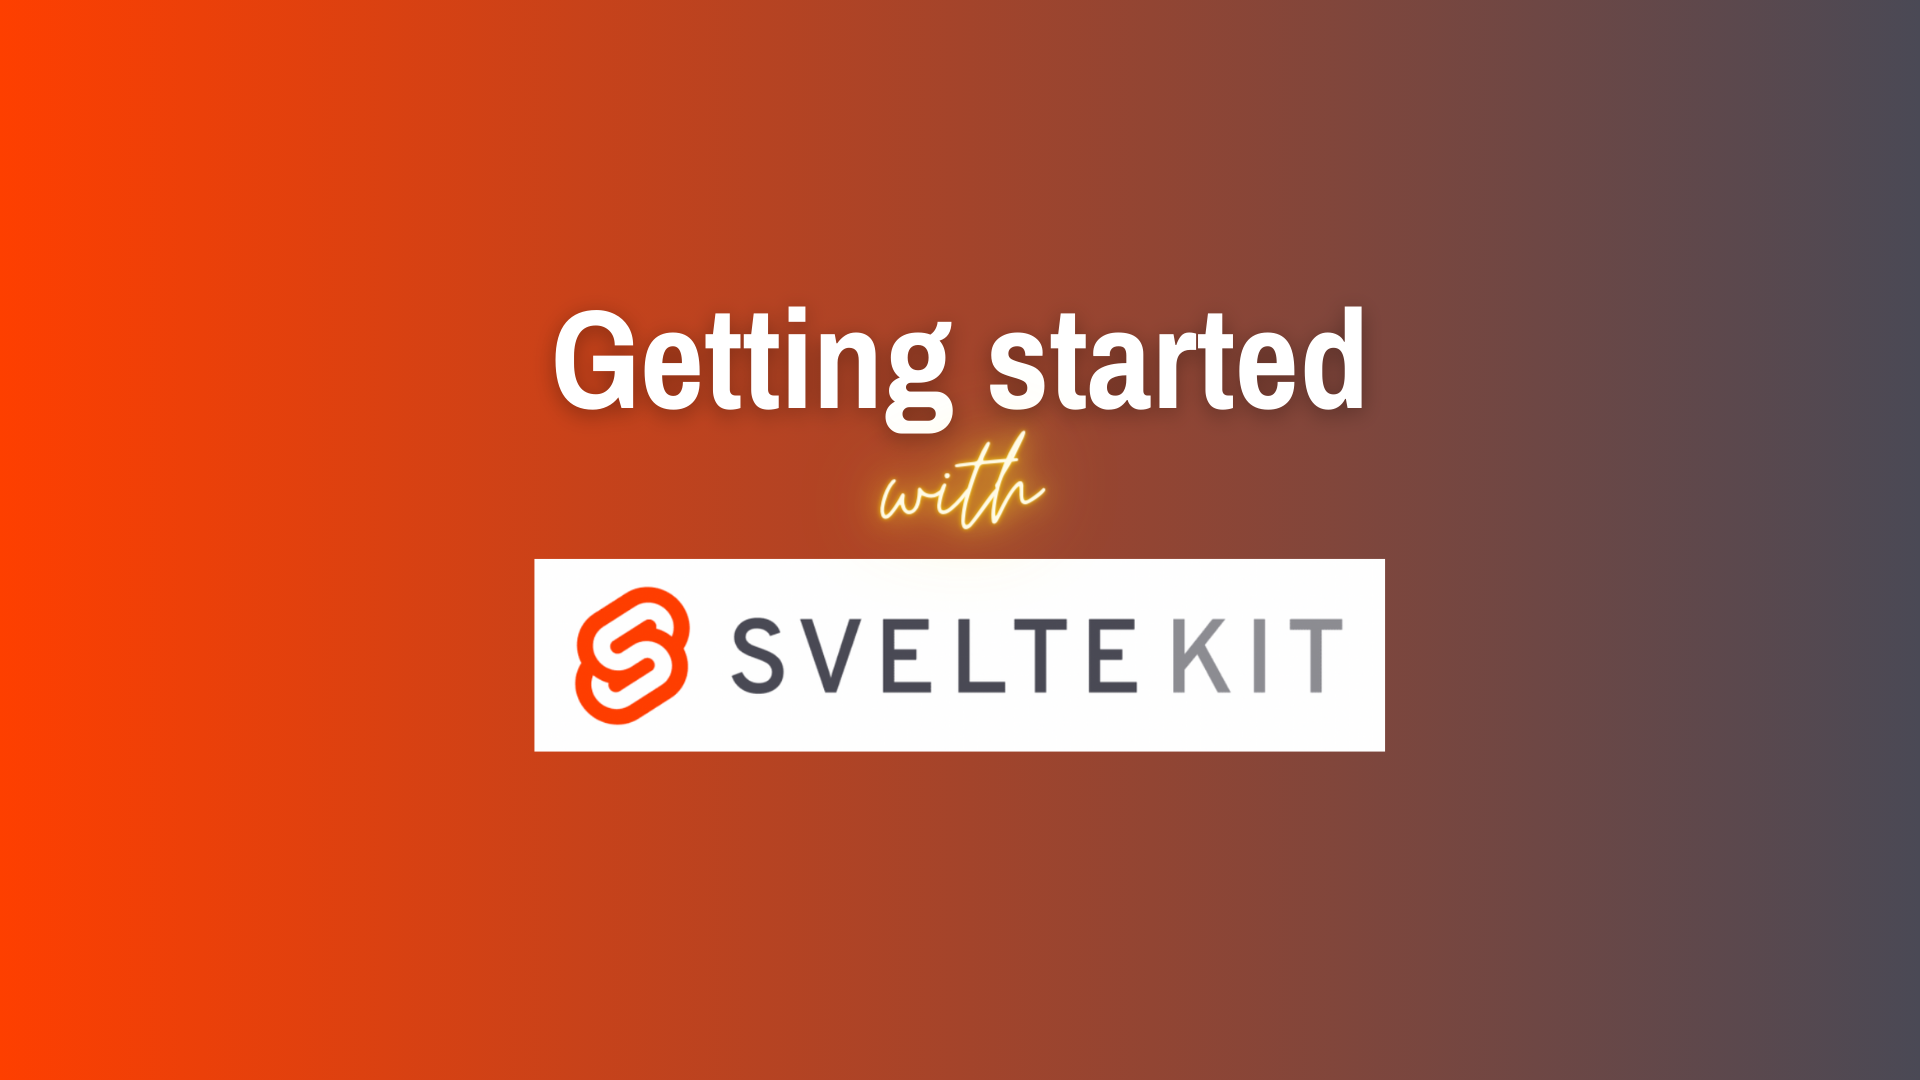 Getting started with SvelteKit on a blended orange and grey background